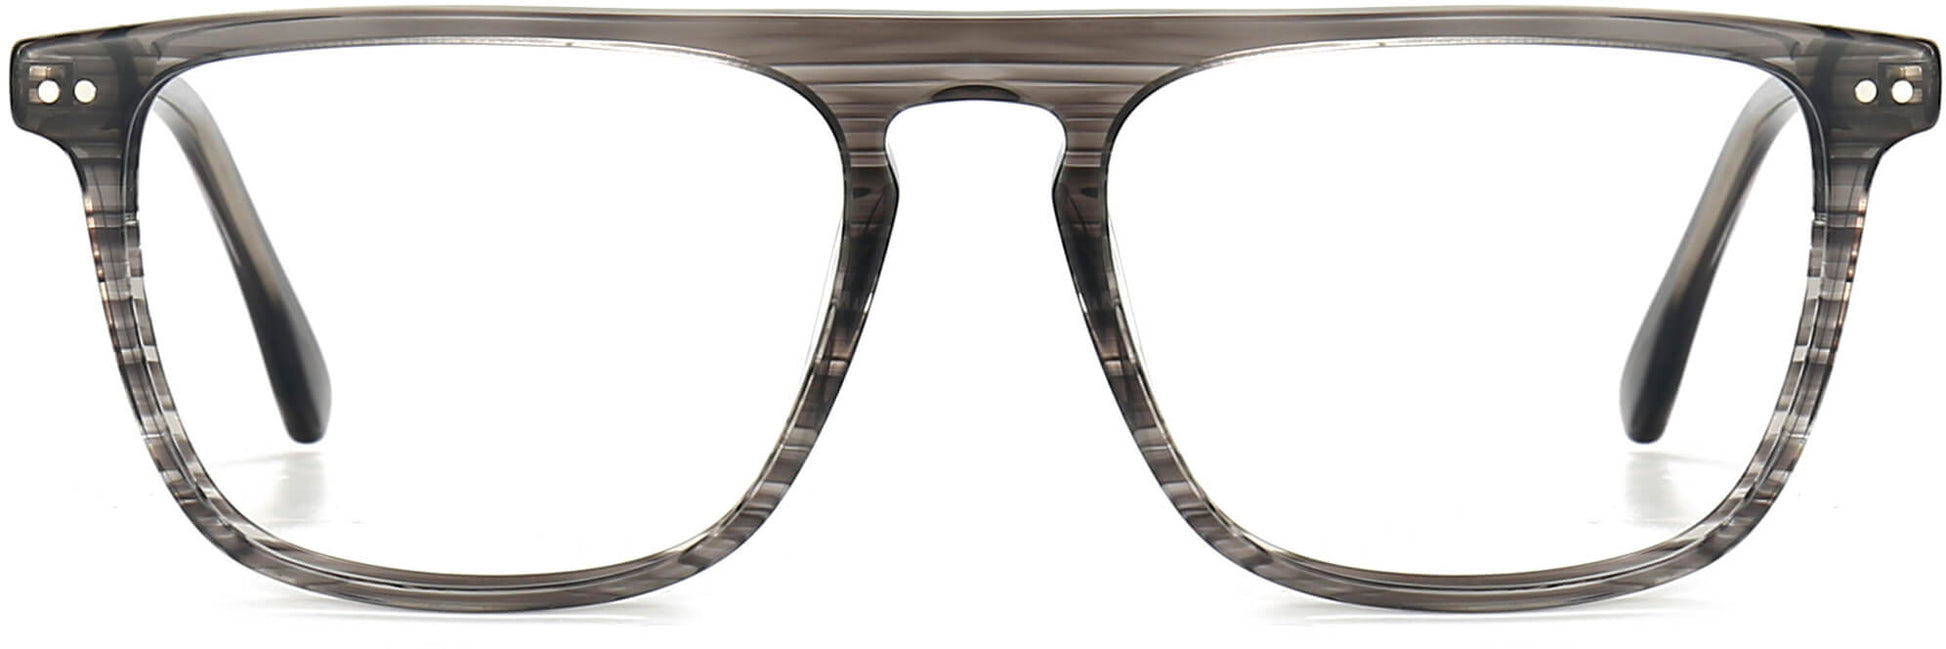 Zain Square Gray Eyeglasses from ANRRI, front view